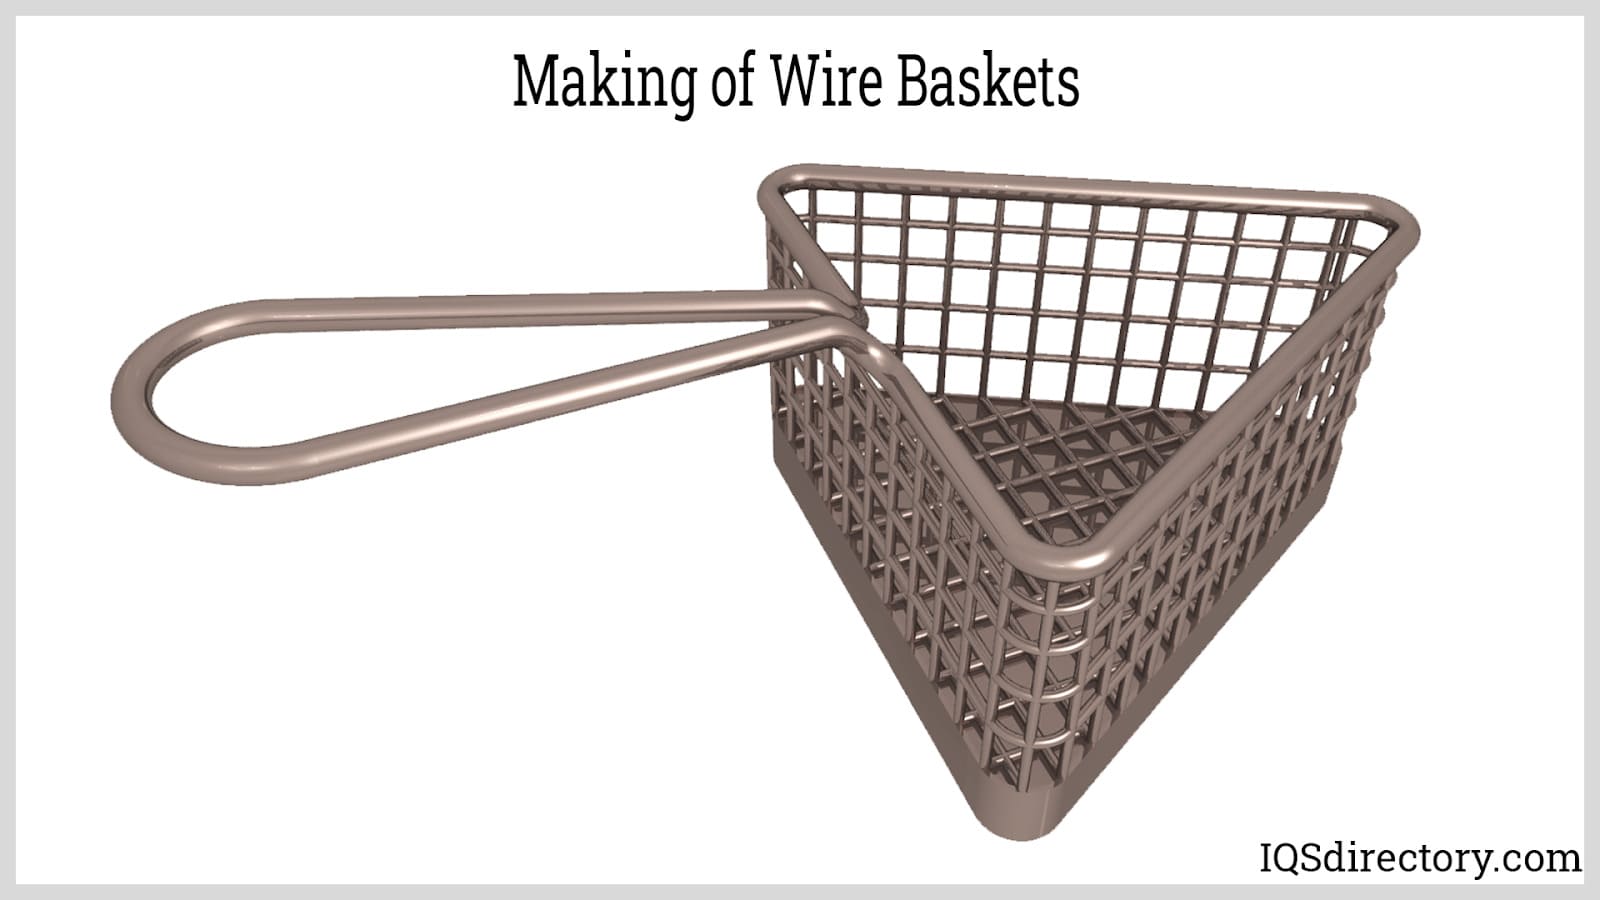 Making of Wire Baskets